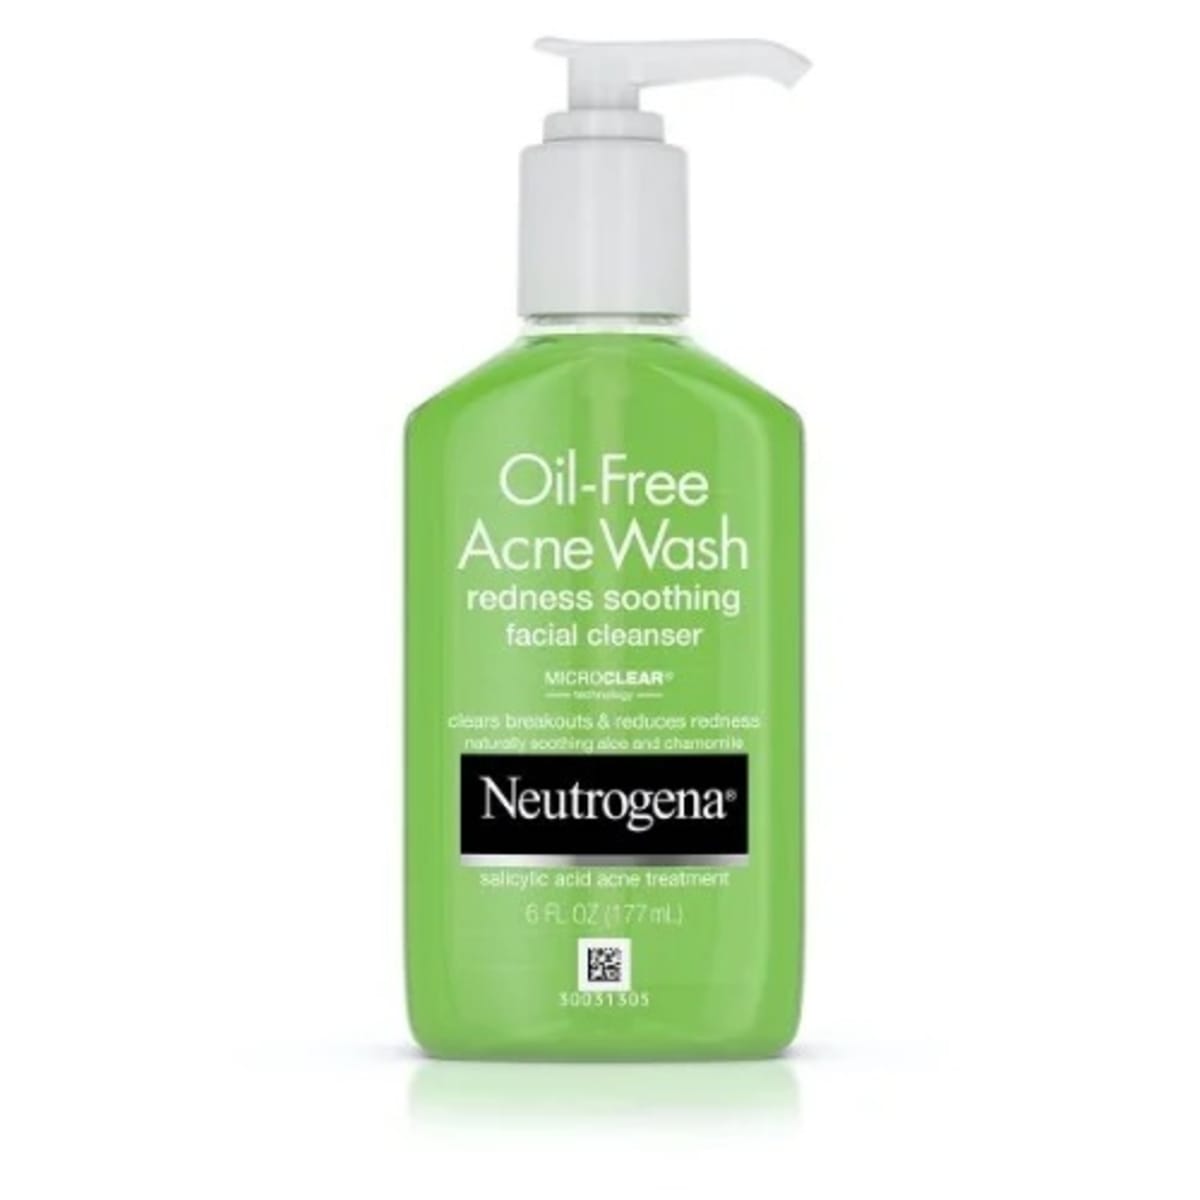 Neutrogena Oil-free Acne Wash Redness Soothing Facial Cleanser -177ml |  Konga Online Shopping